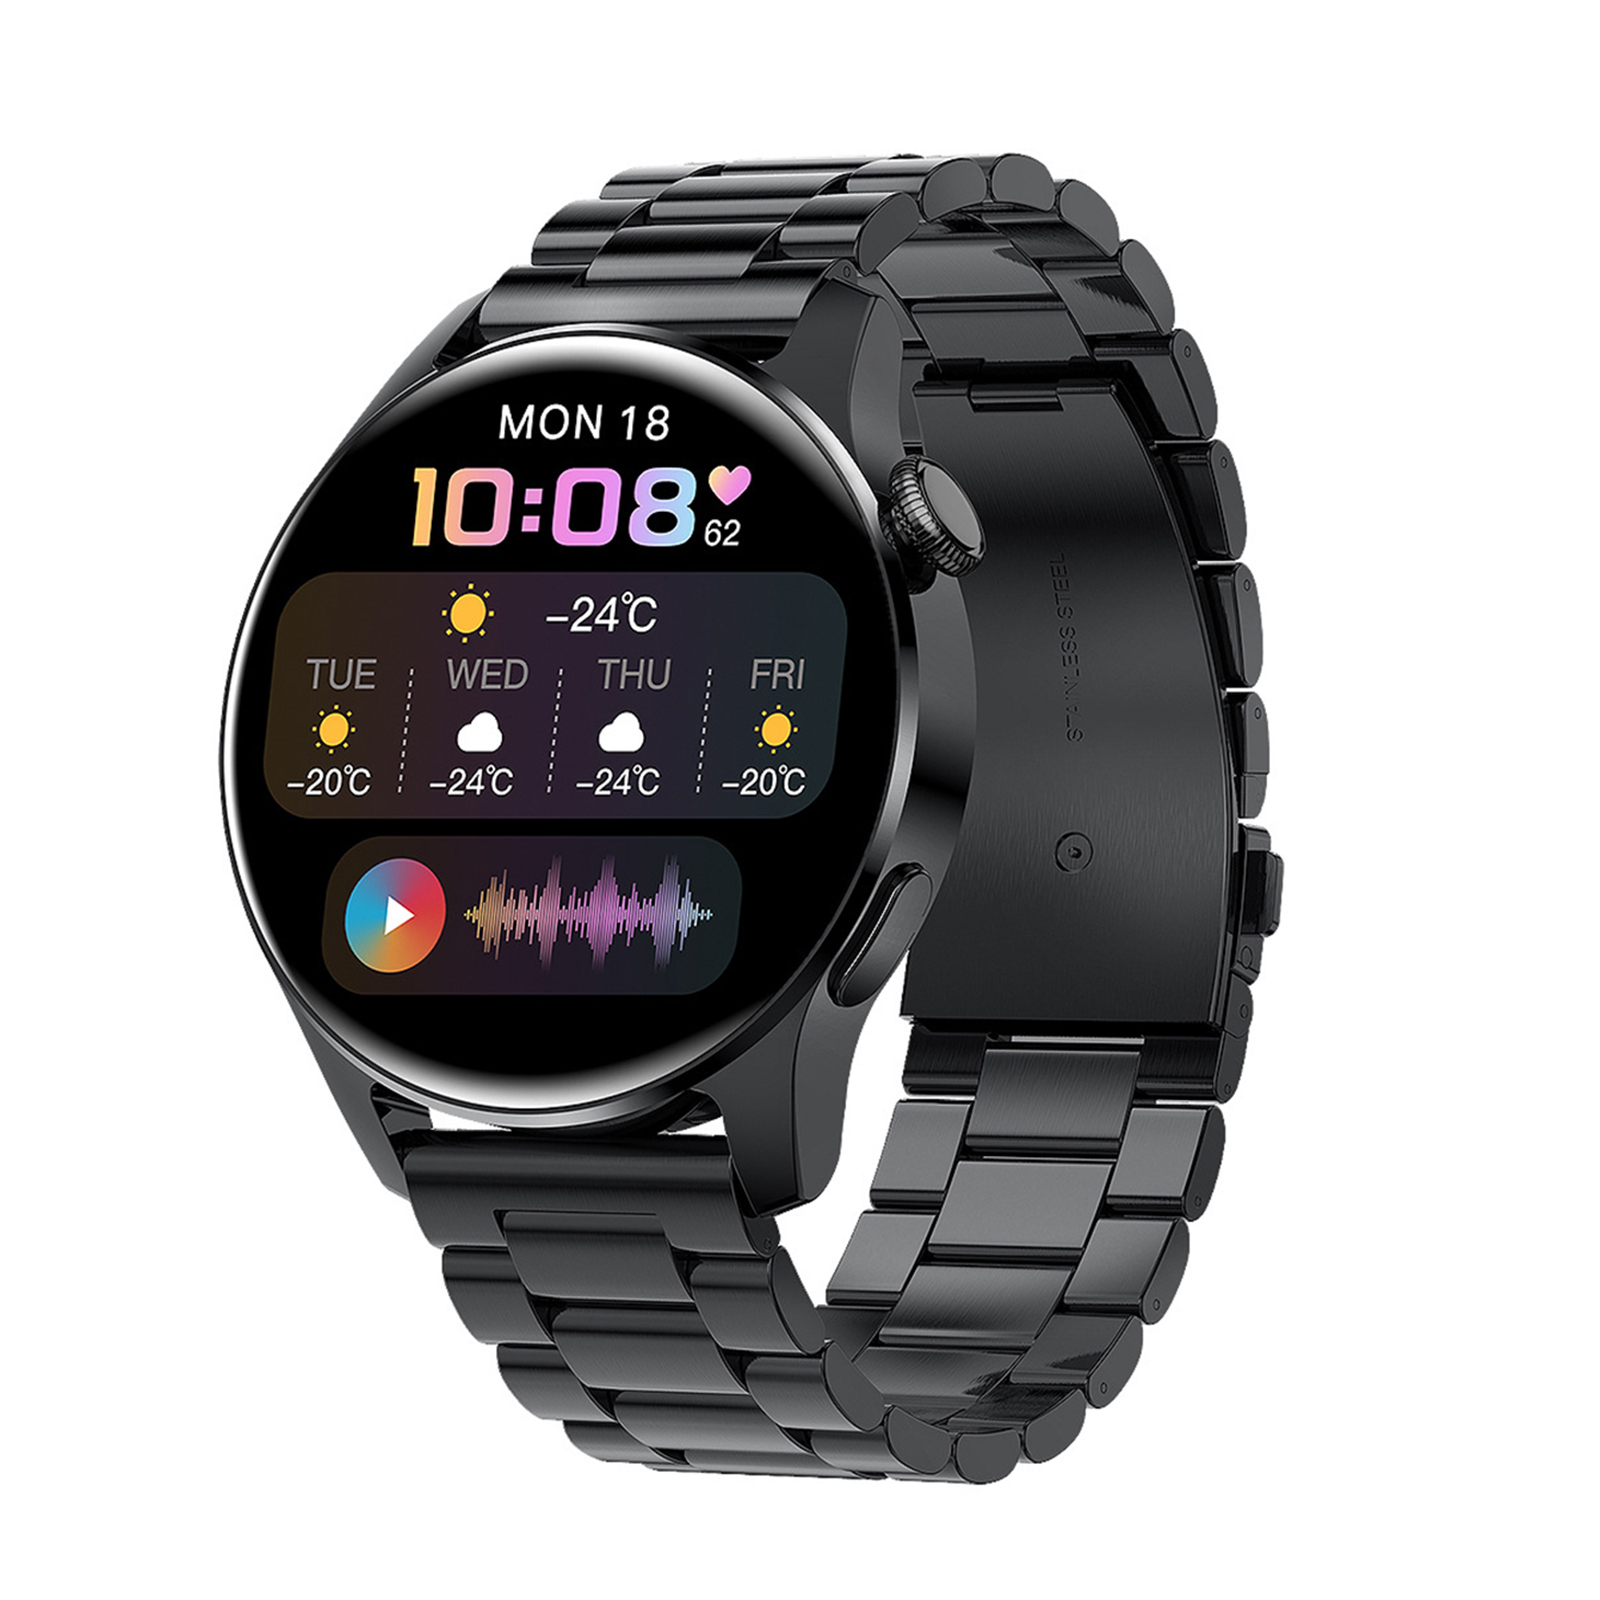 1 28 Inch Smart Watch - HD Screen, Sports Fitness Tracker, Magnetic Charging, Free Shipping!